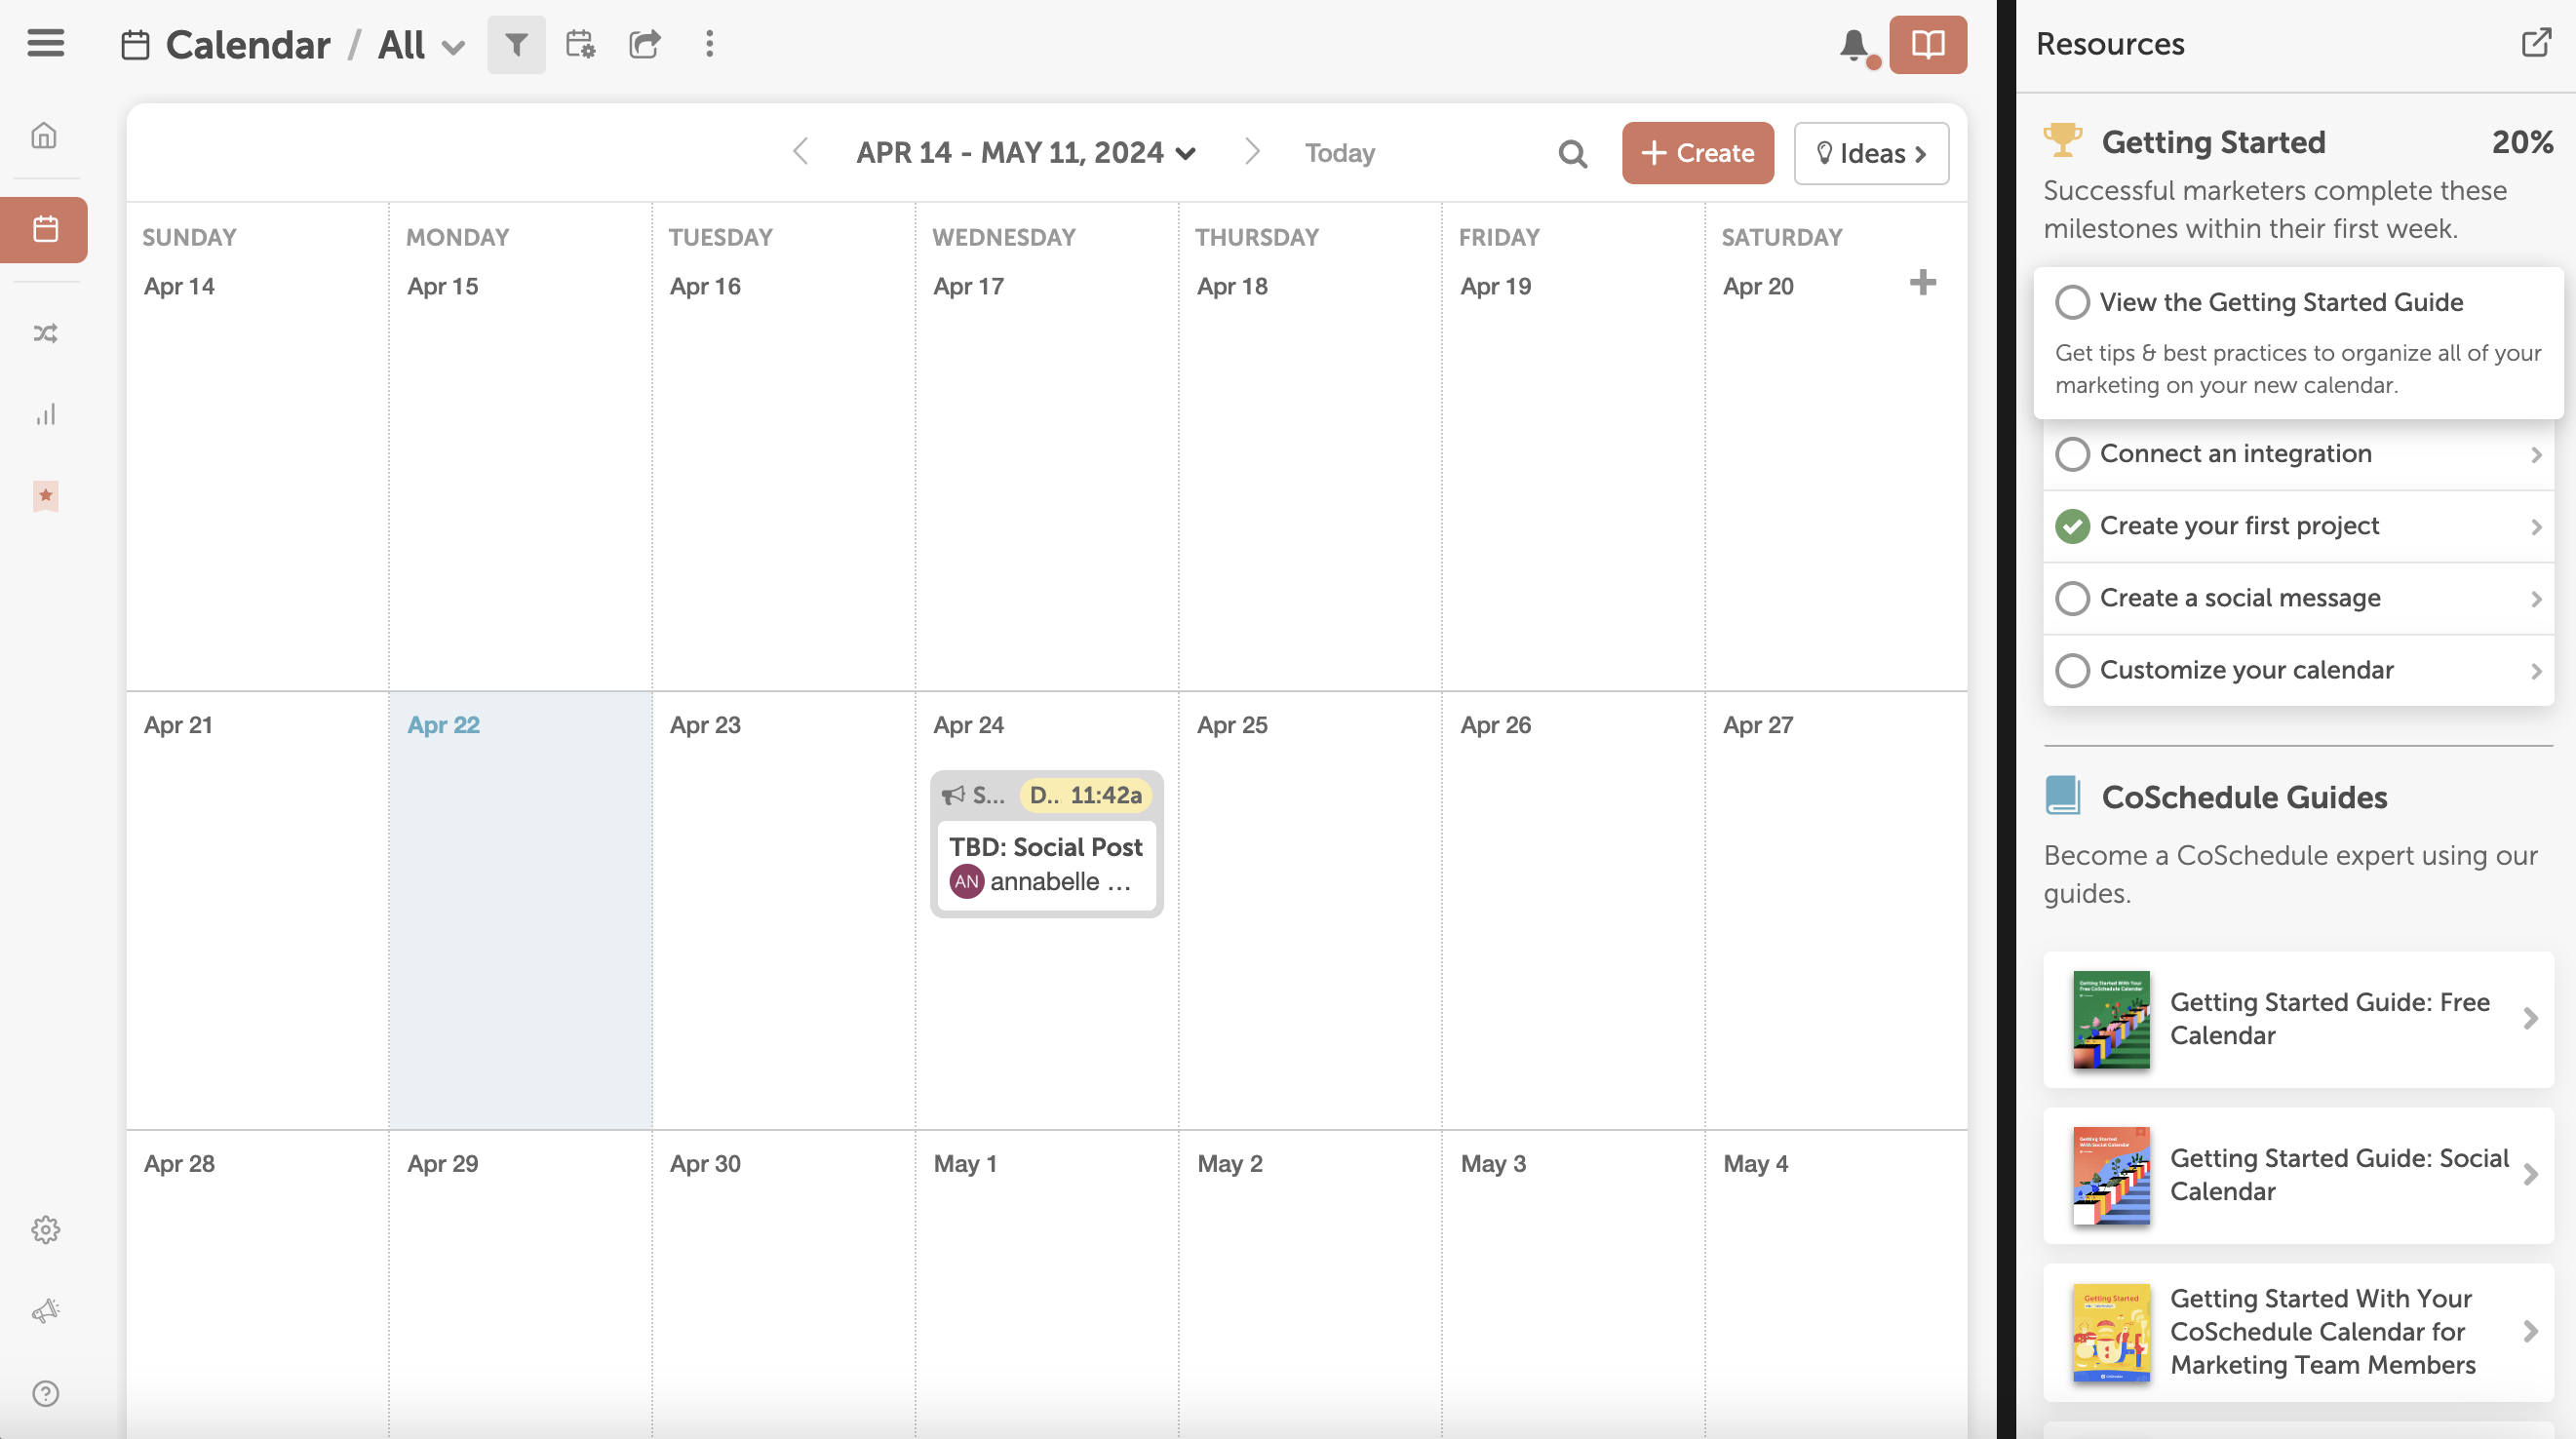 CoSchedule content calendar interface with various scheduled tasks and events such as marketing projects, social posts, and guide creation.